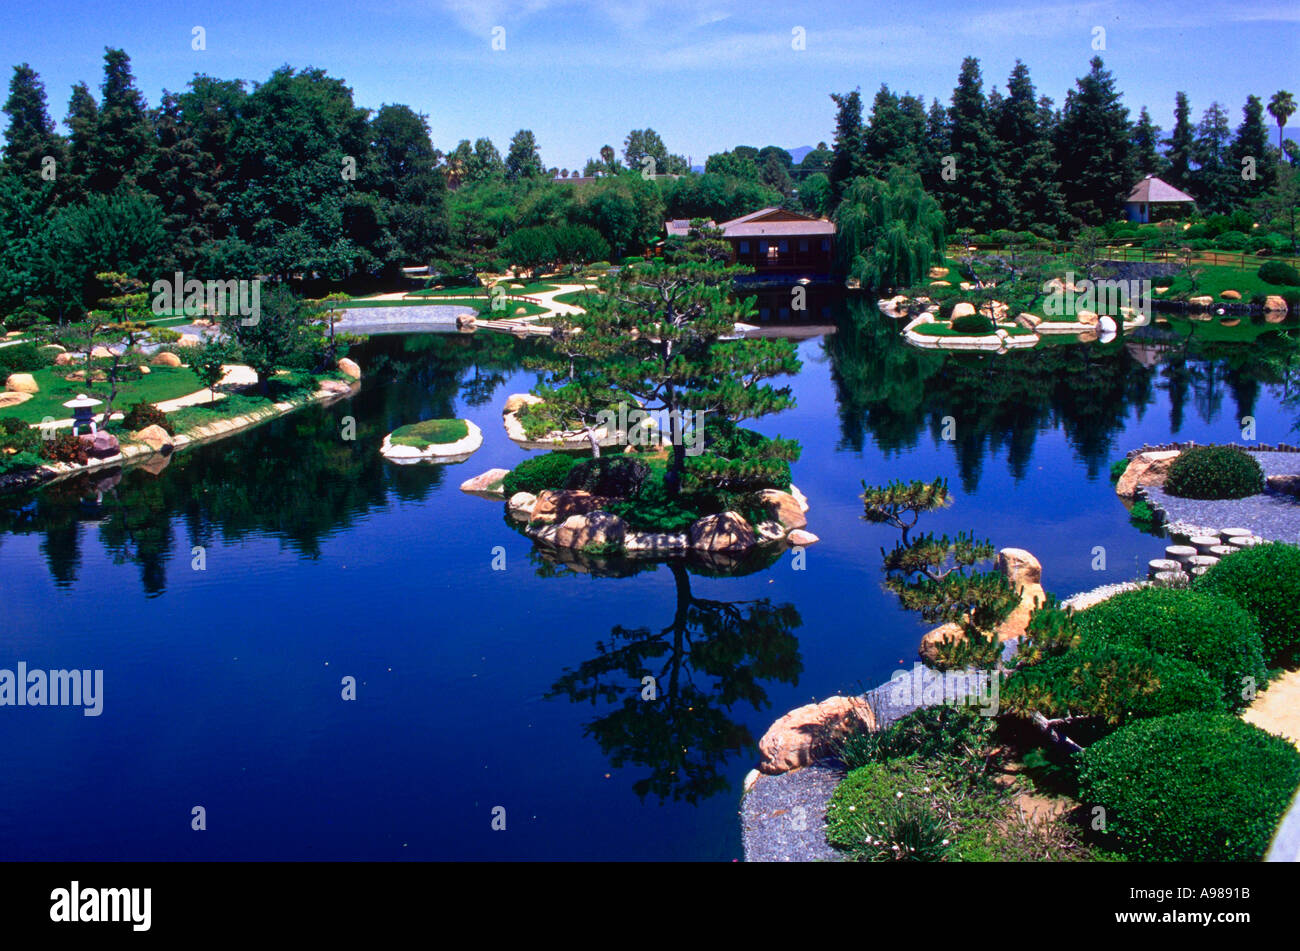 Aerial View Of A Japanese Garden In Van Nuys California Stock